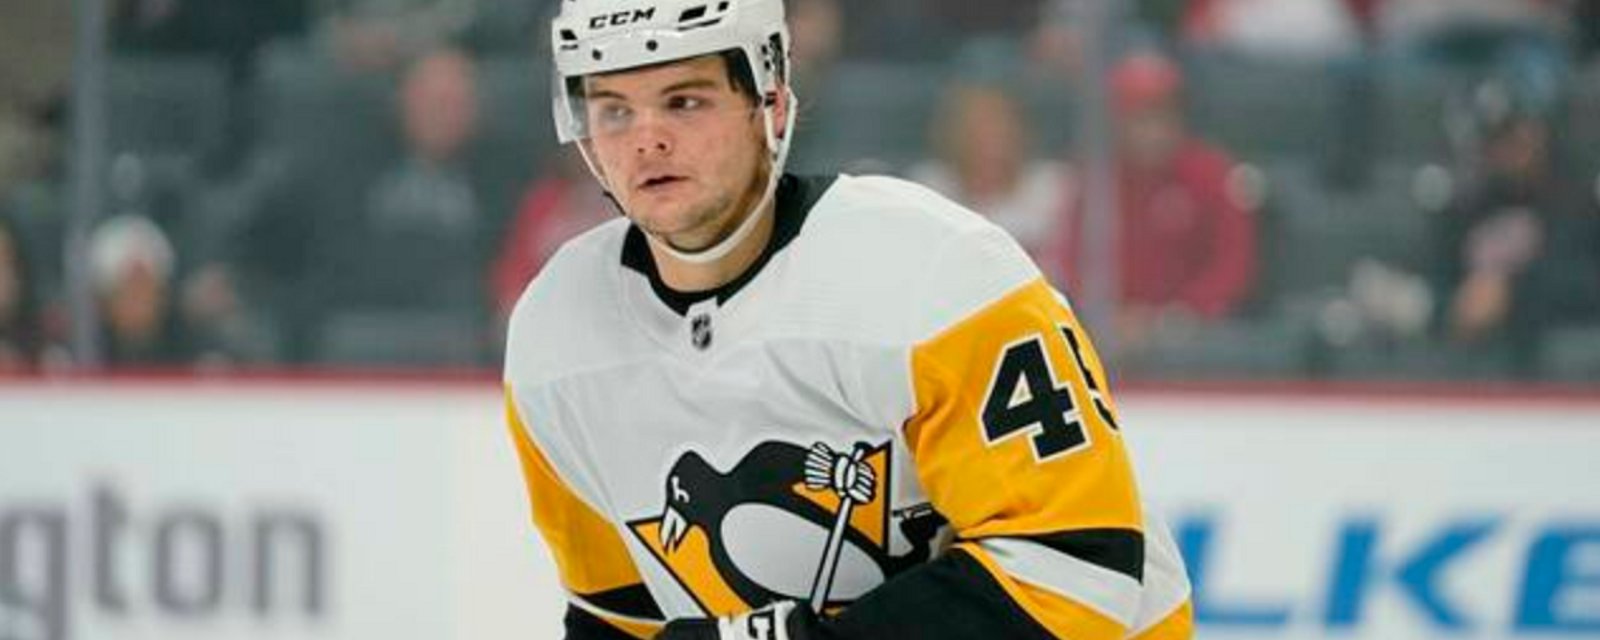 Penguins forward placed on waivers, Monday.